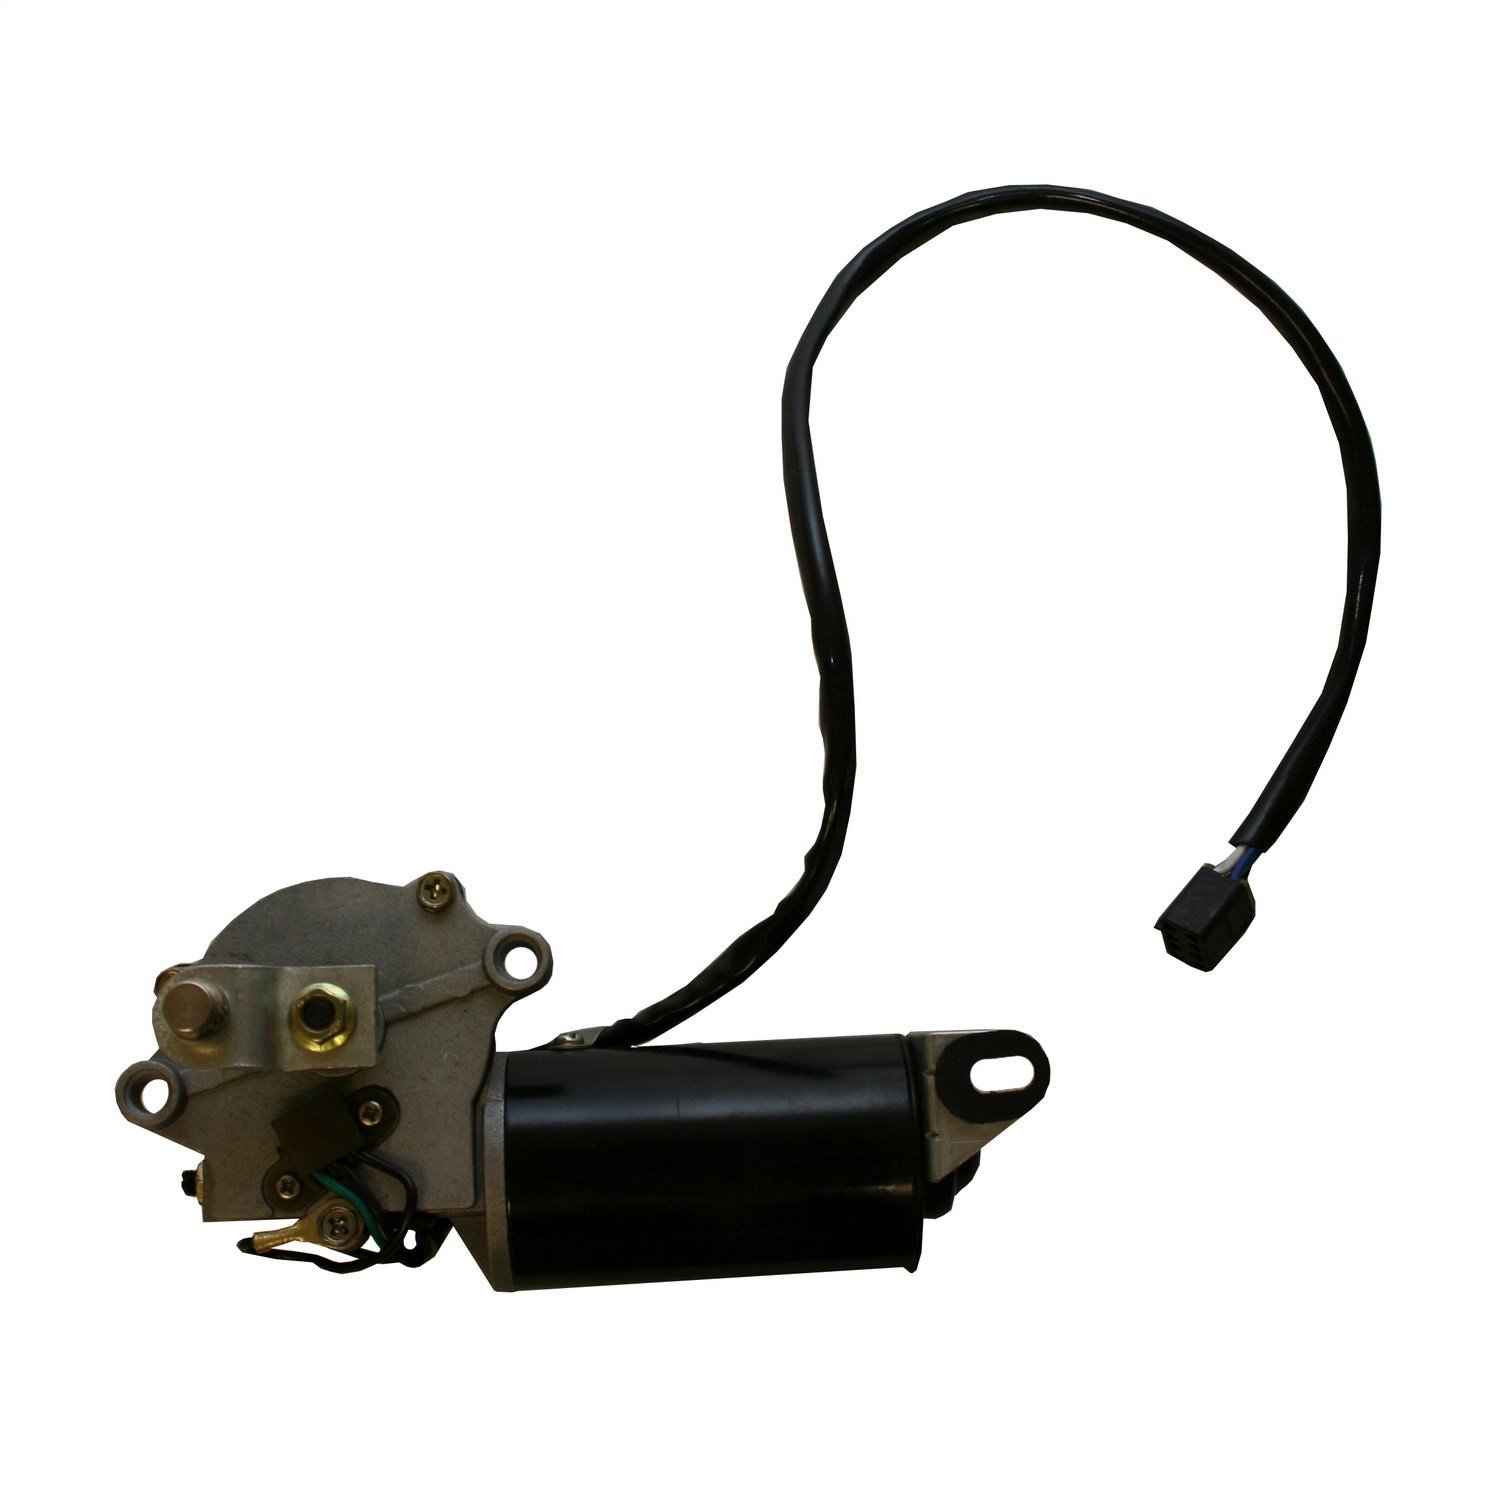 Replacement windshield wiper motor from Omix-ADA, Fits 87-95